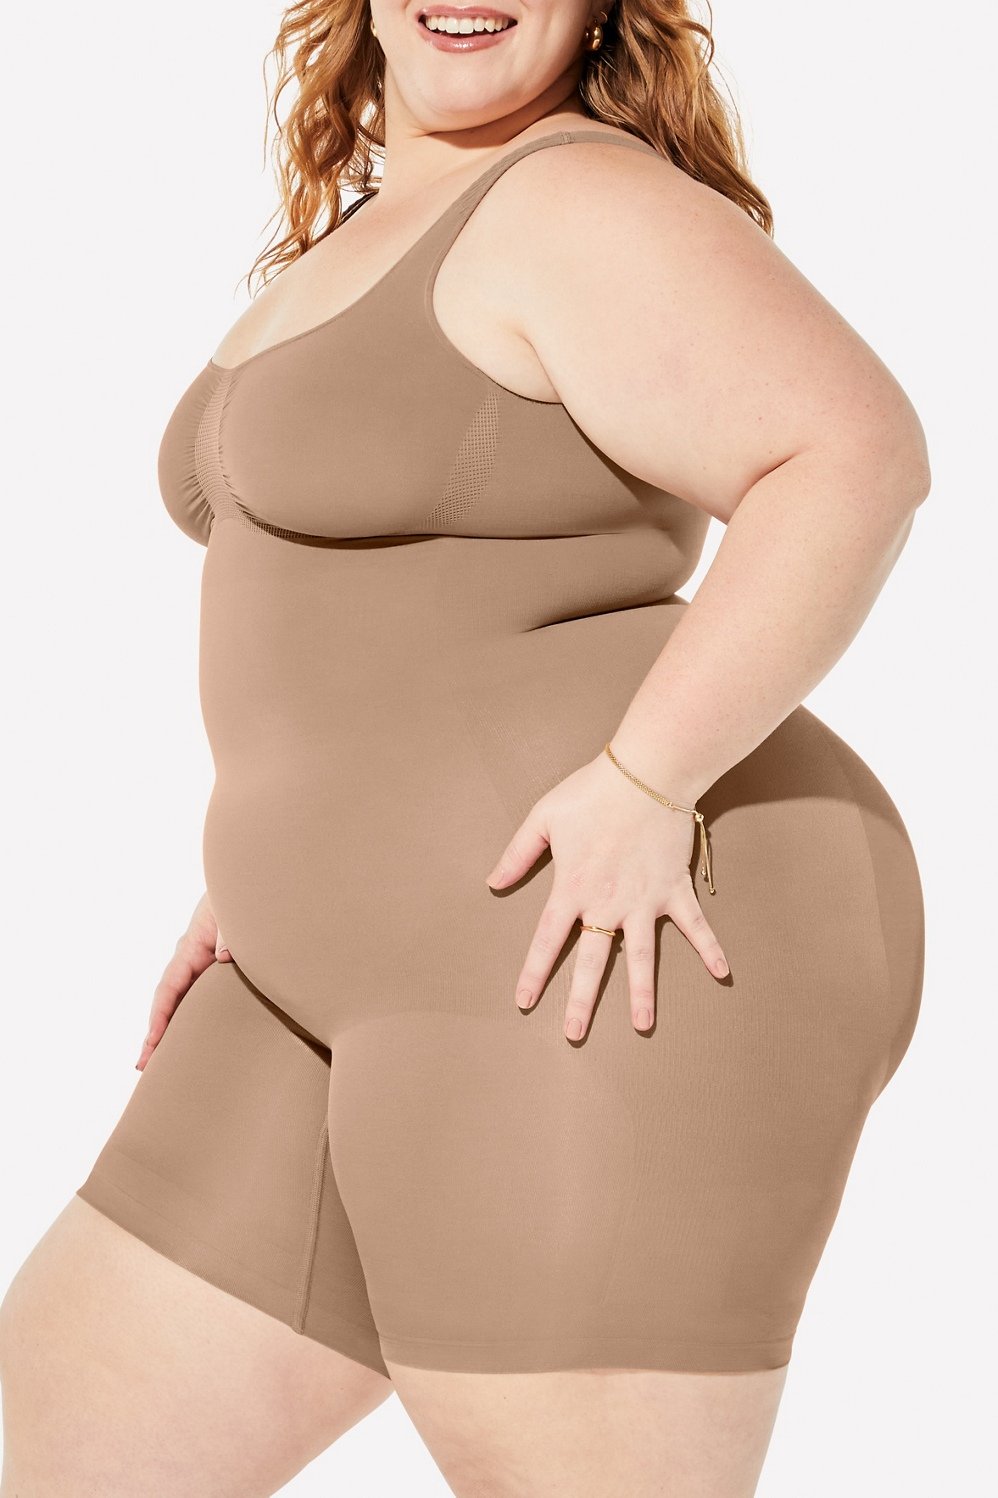 Let's try @YITTY's #nearlynaked collection and see the different fits , Shapewear